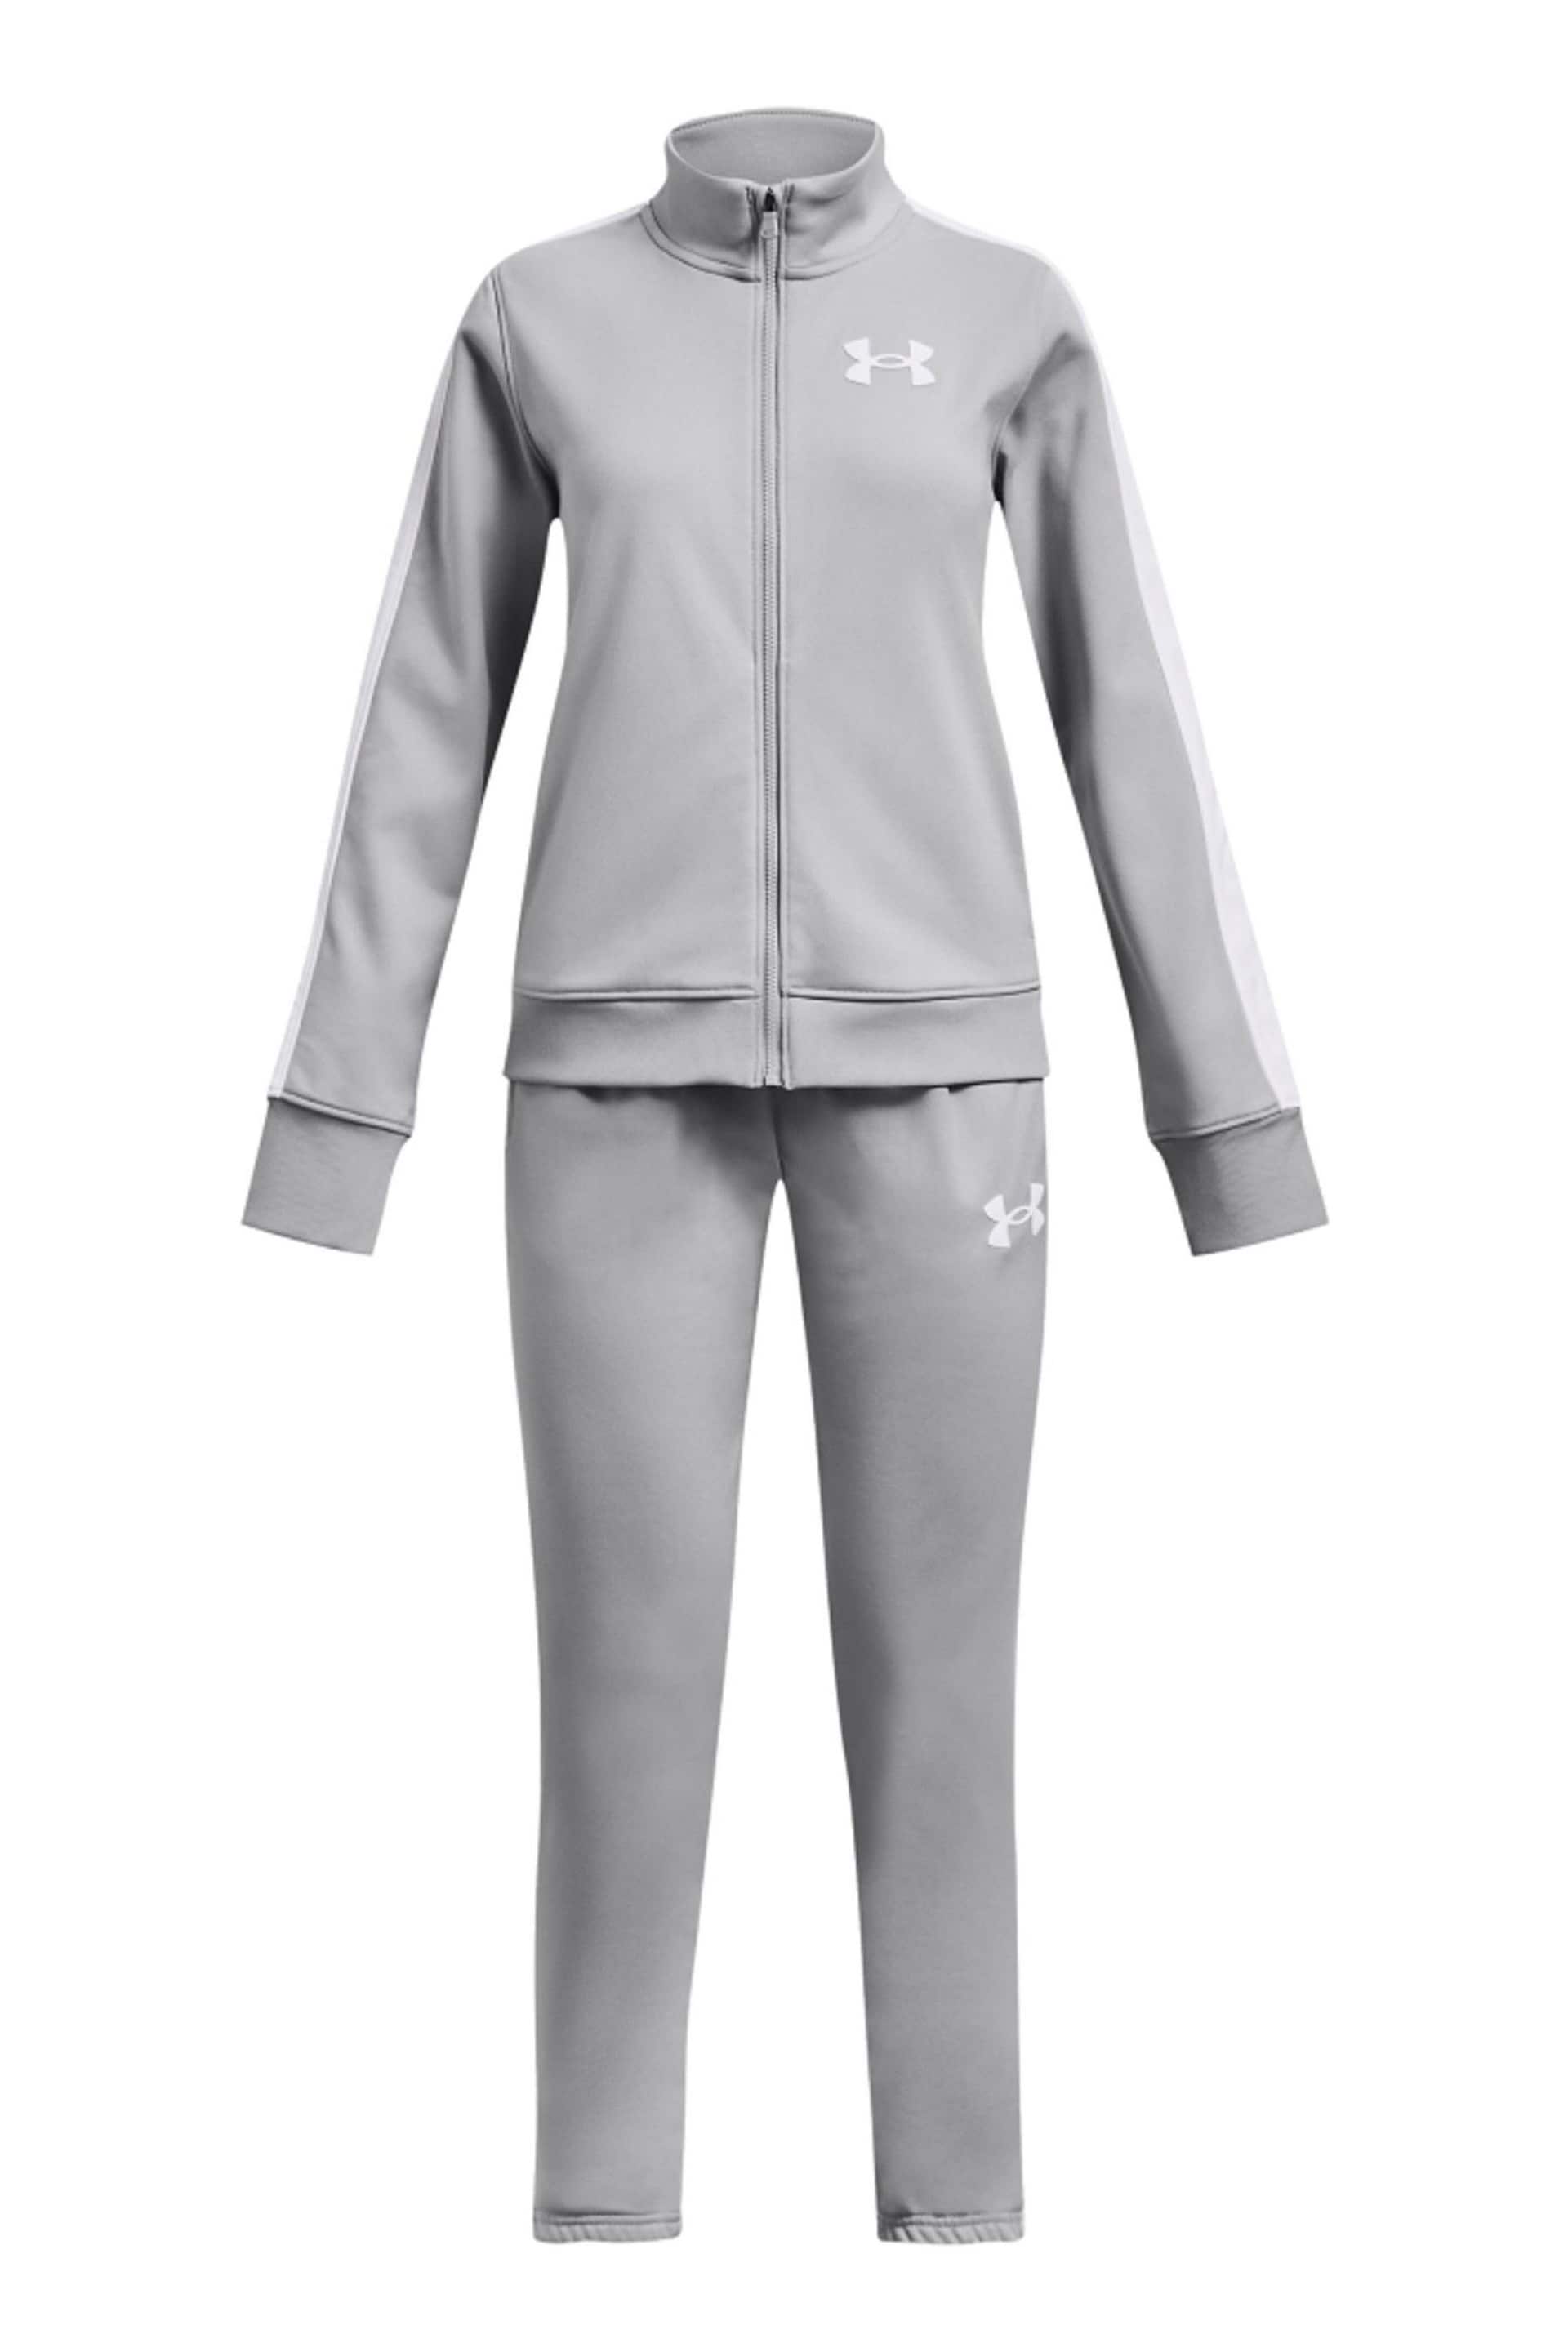 Under Armour Grey Knit Tracksuit - Image 1 of 4